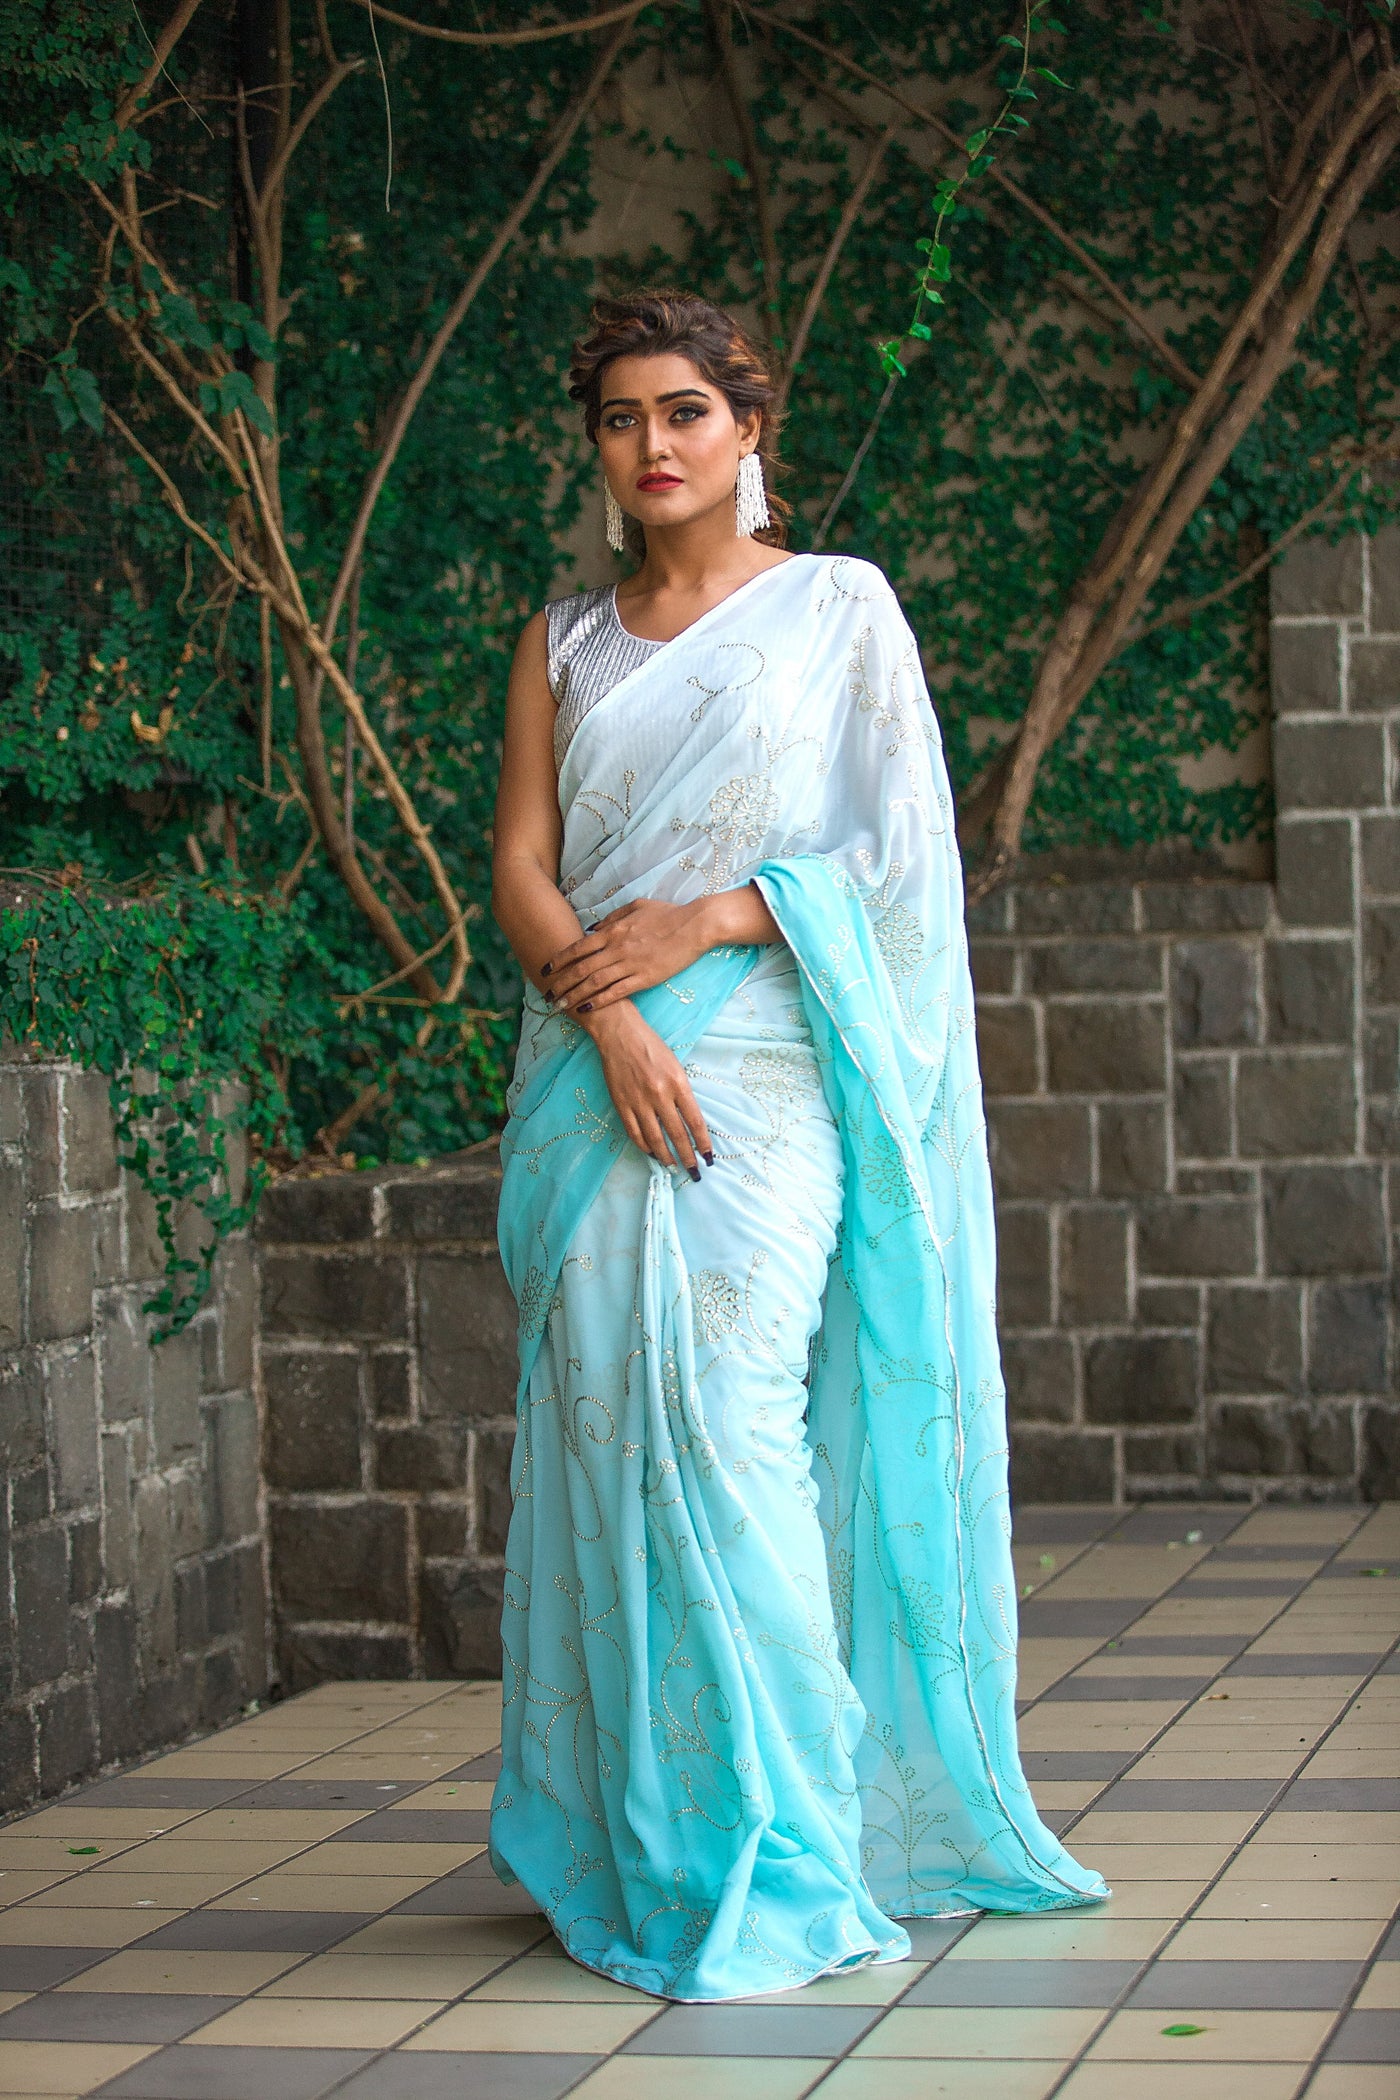 White Aqua Blended Saree - Indian Clothing in Denver, CO, Aurora, CO, Boulder, CO, Fort Collins, CO, Colorado Springs, CO, Parker, CO, Highlands Ranch, CO, Cherry Creek, CO, Centennial, CO, and Longmont, CO. Nationwide shipping USA - India Fashion X